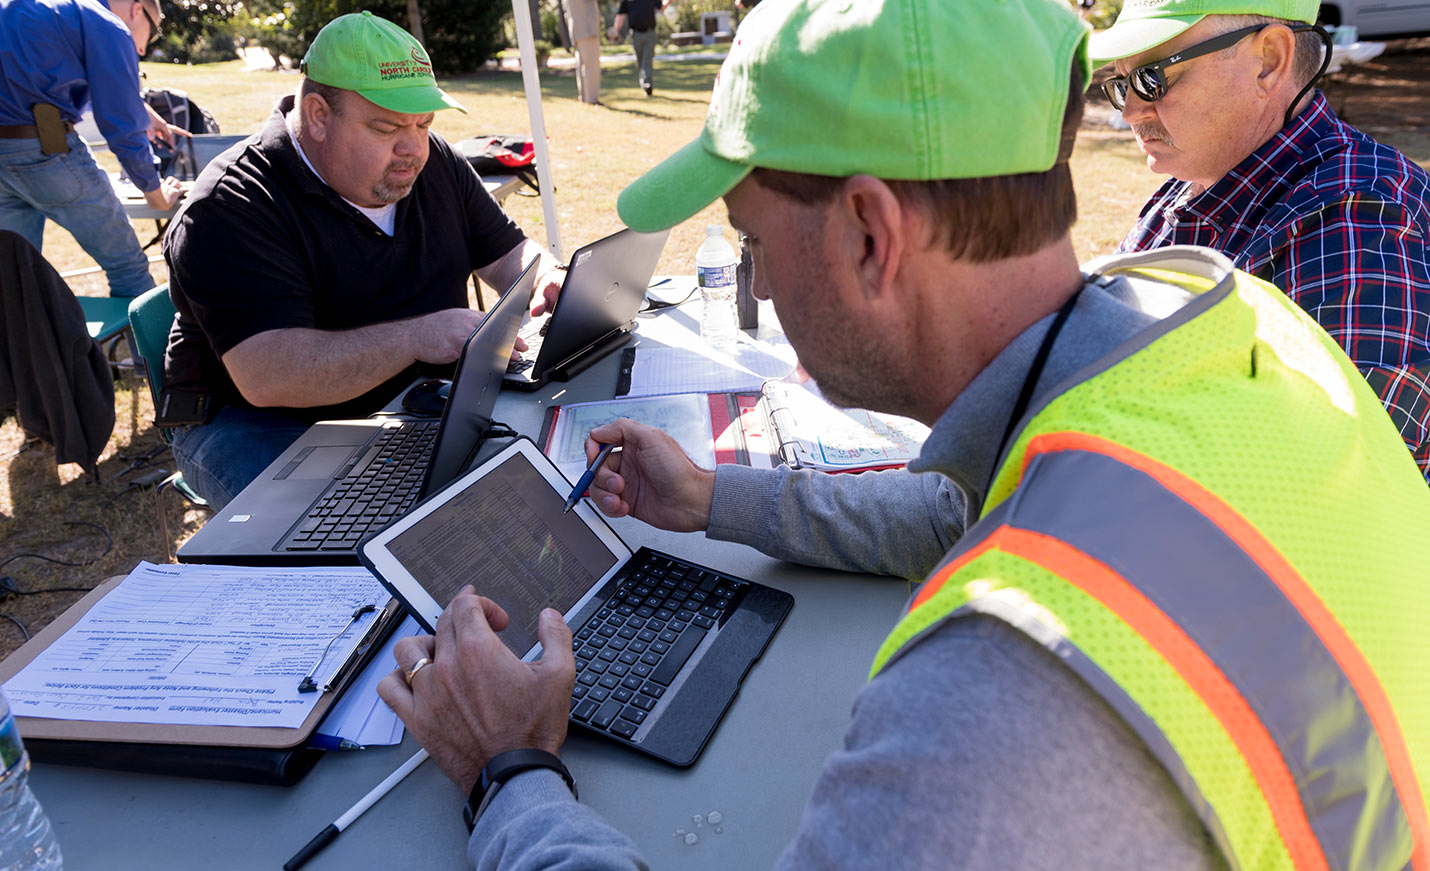 people work outdoors on laptops during a disaster drill